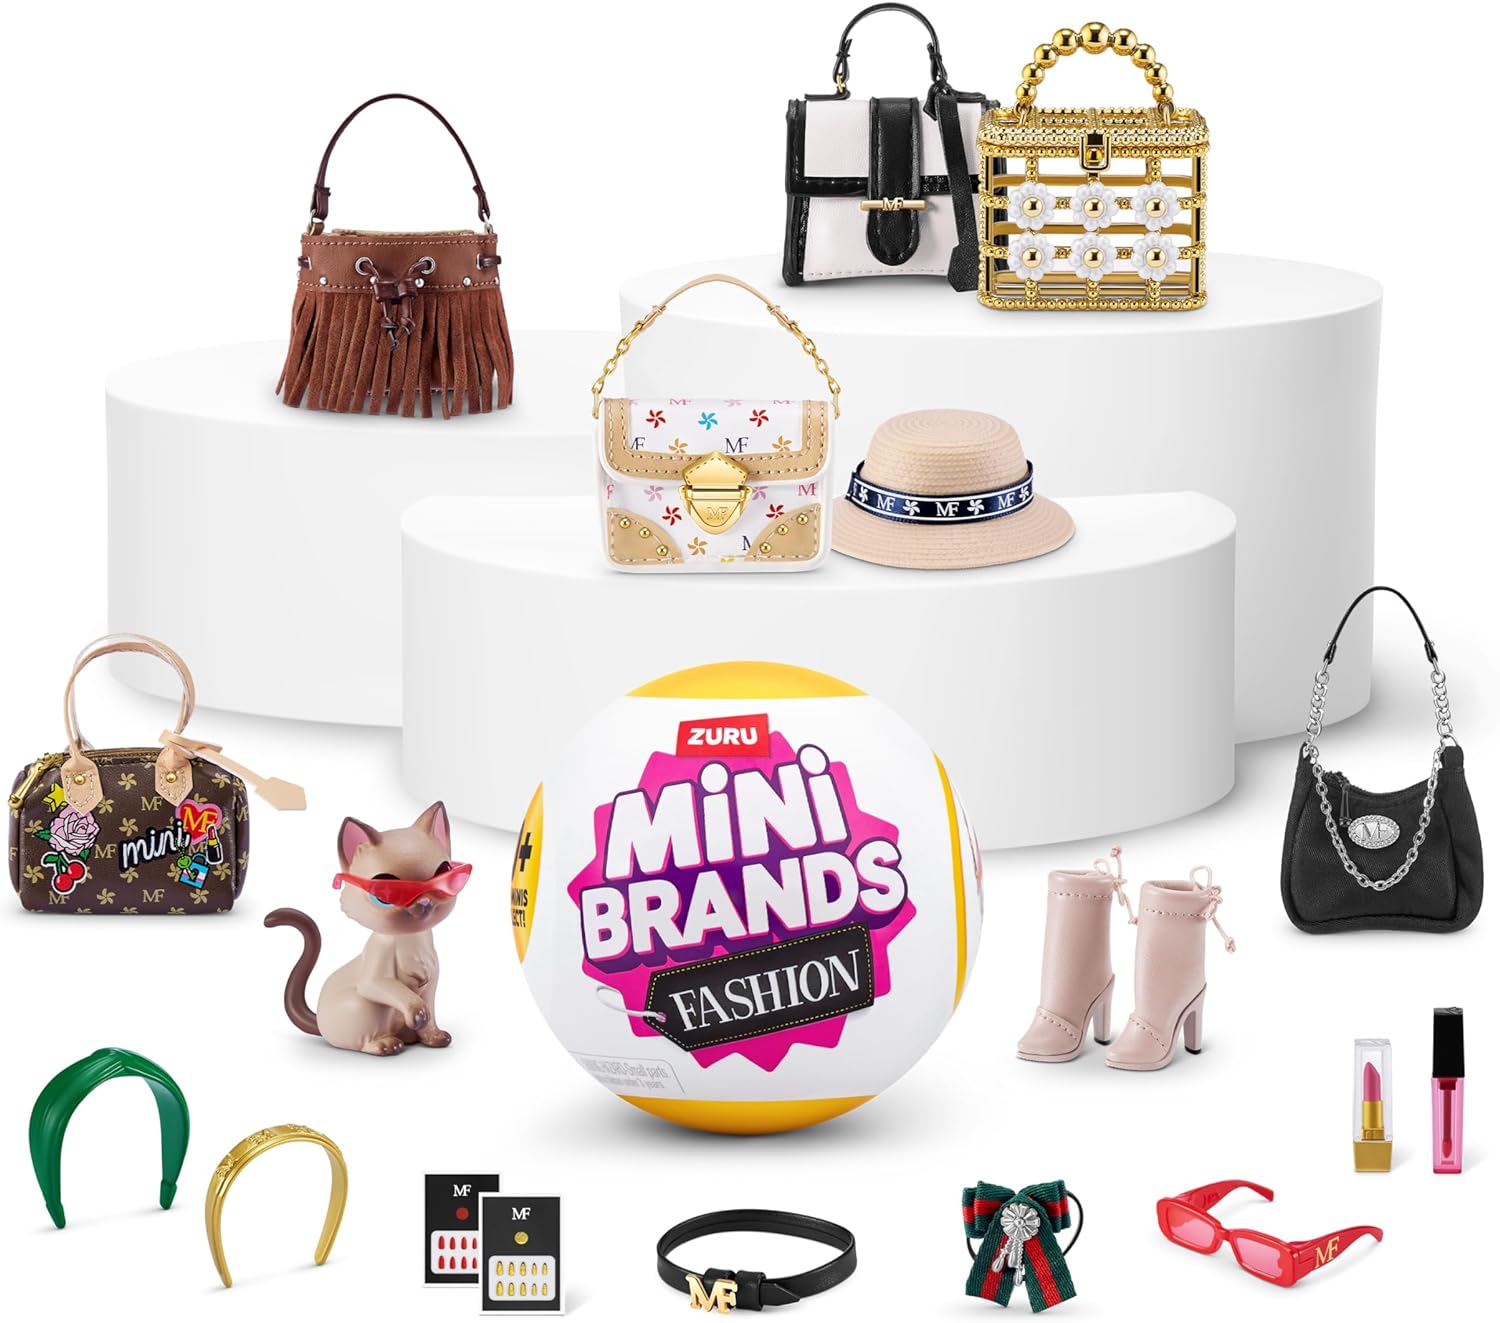 Mini Brands Fashion Series 3 has Shoes!!! And we found them